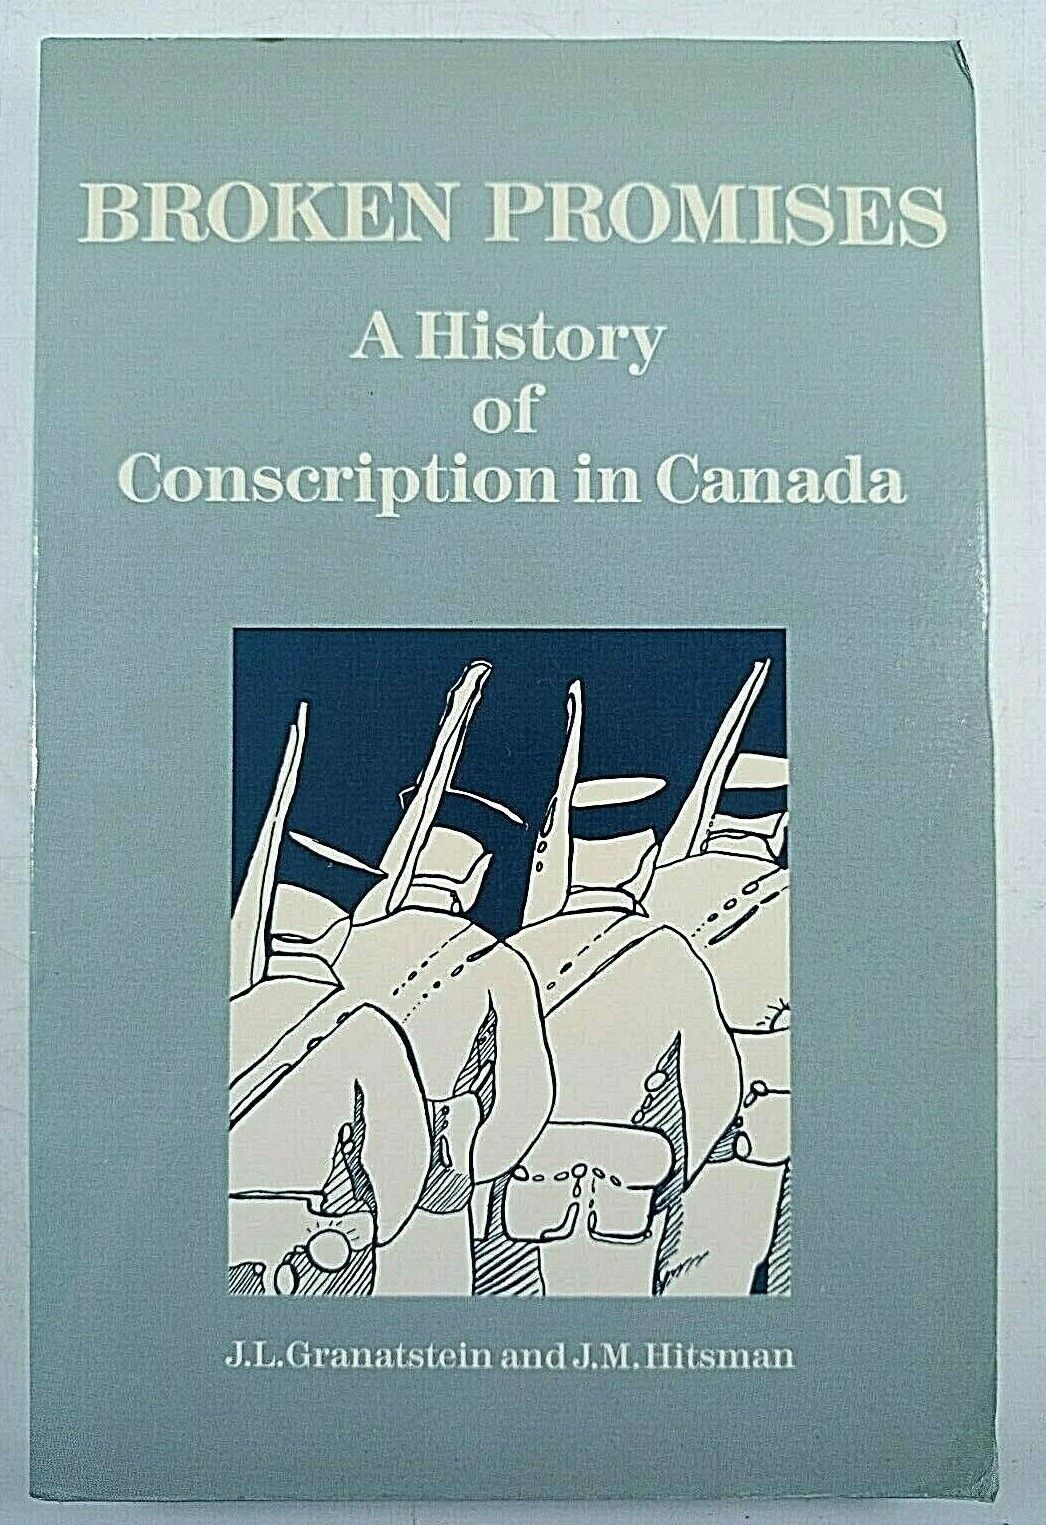 WW1 WW2 Cold War Canadian Broken Promises History Conscription 2 Reference Book